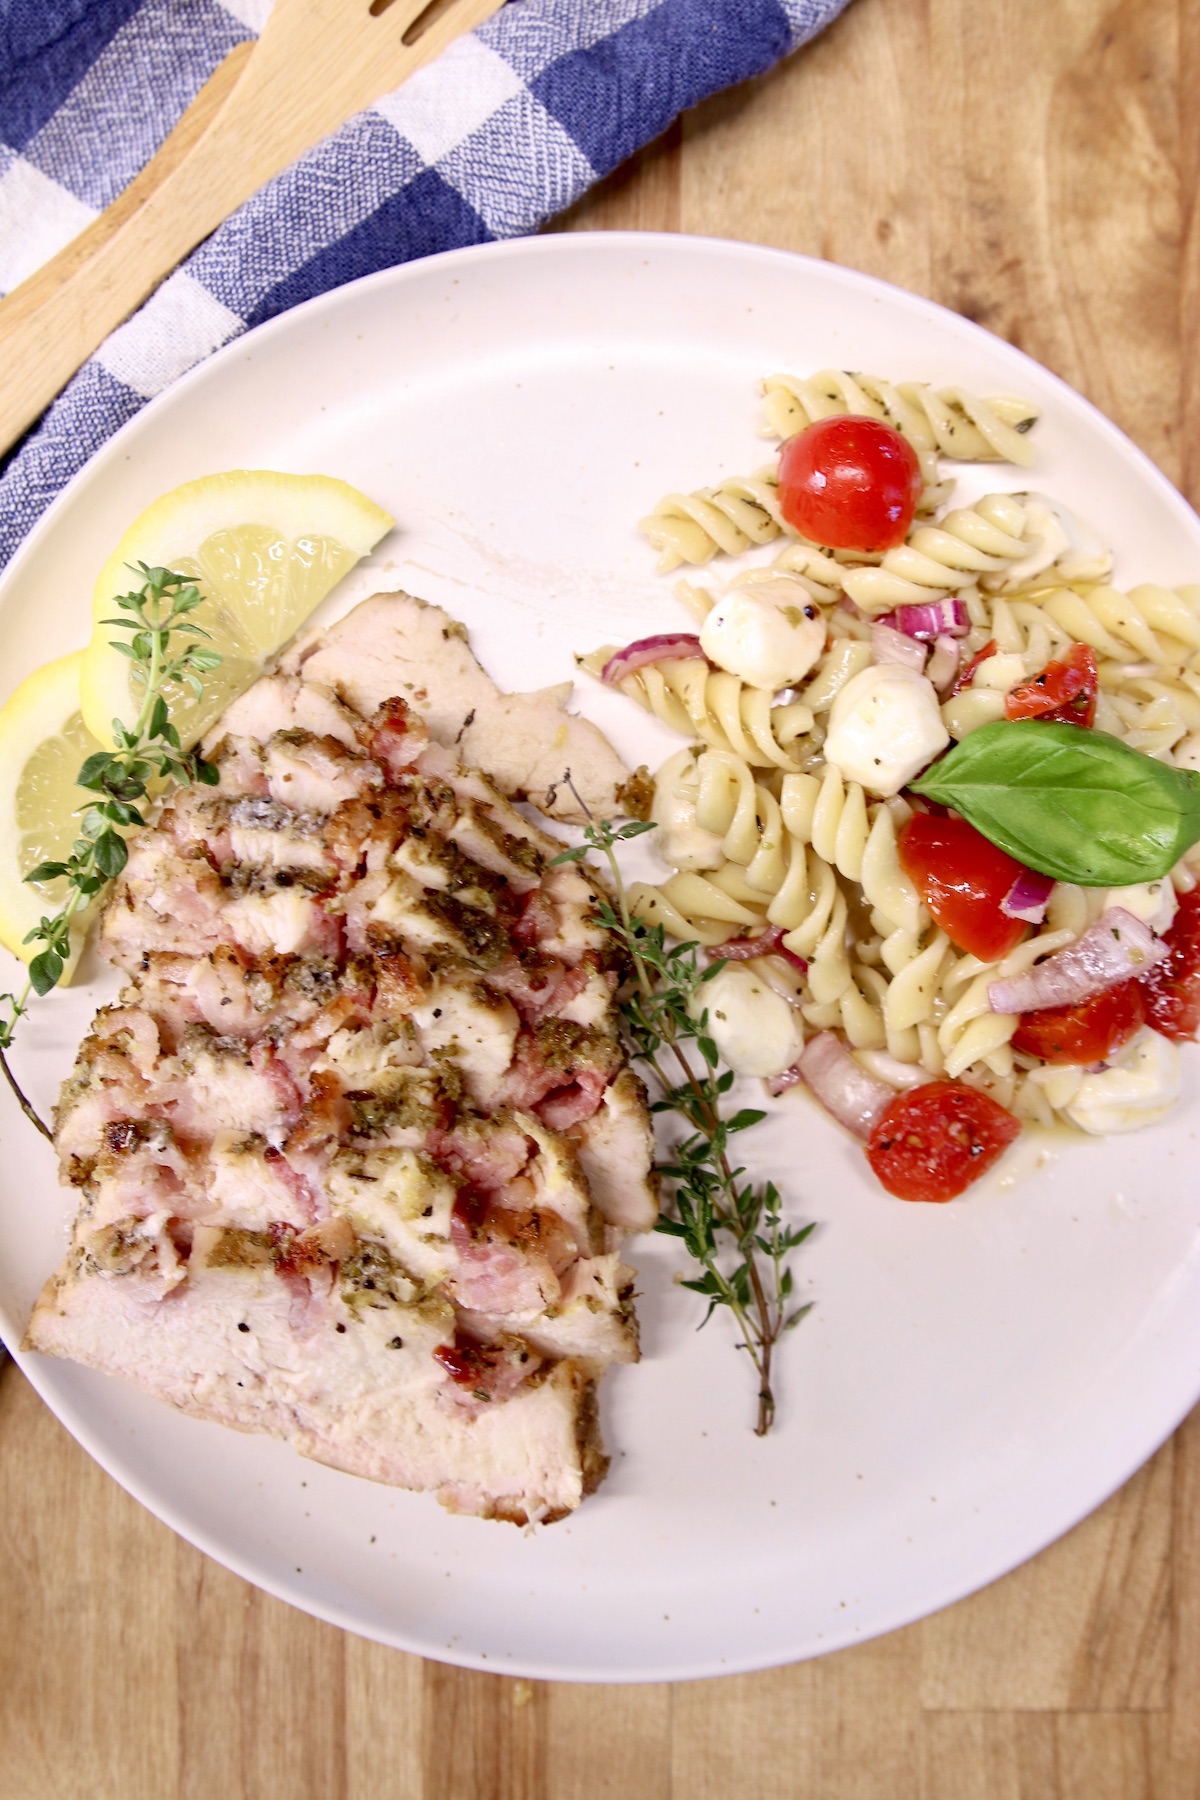 plate of sliced chicken and pasta salad with tomatoes, mozzarella and basil